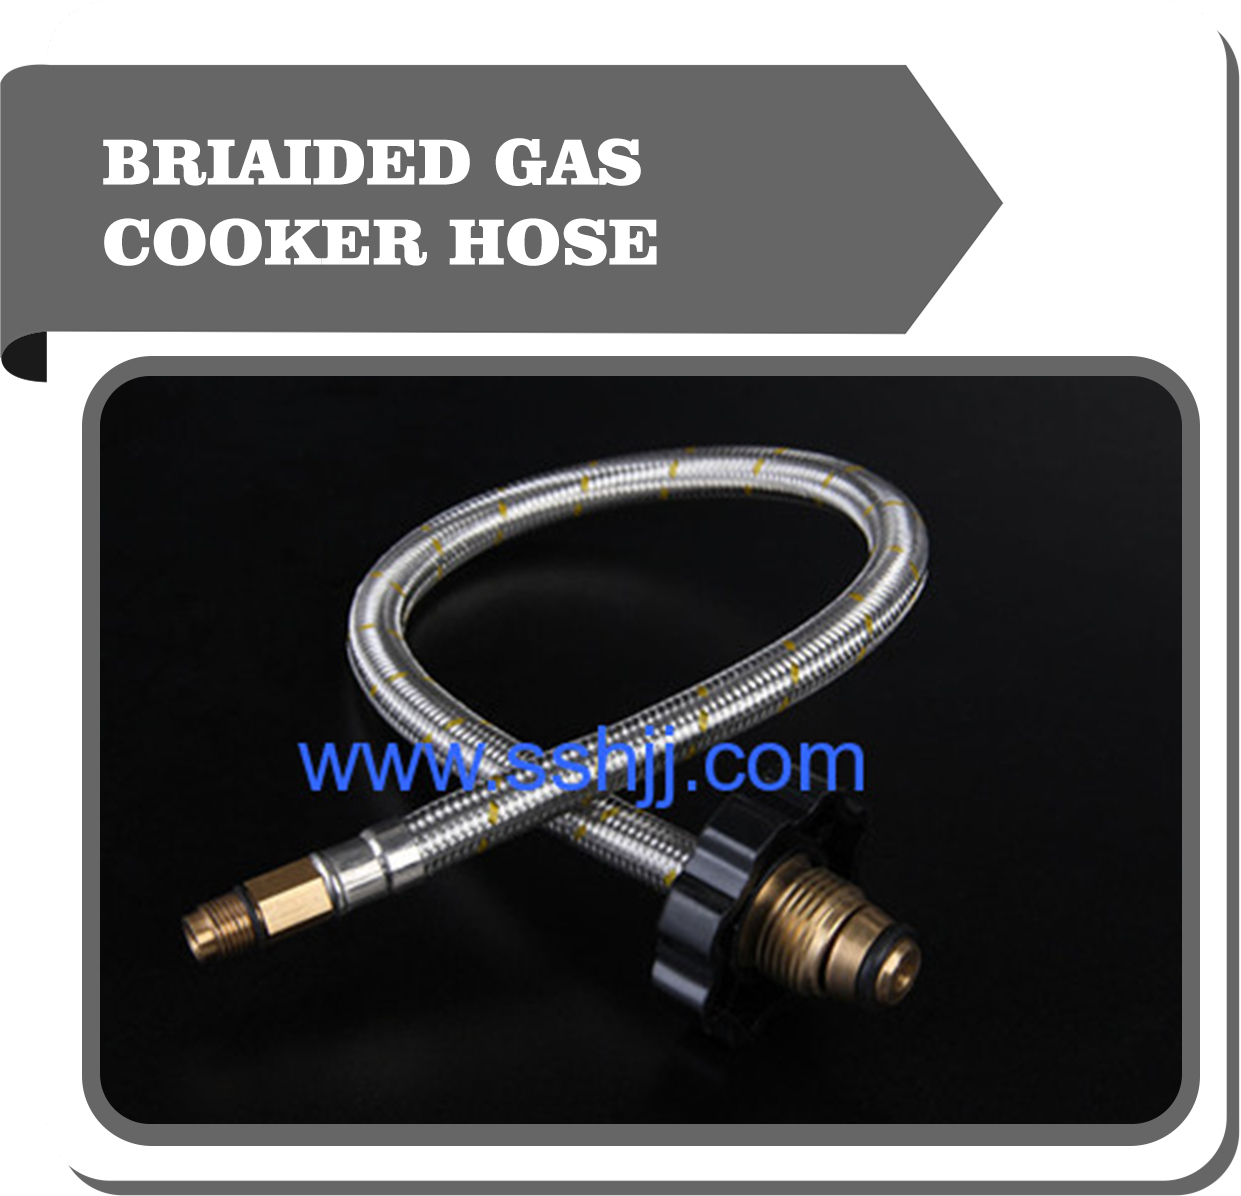 Braided gas cooker hose with black handle